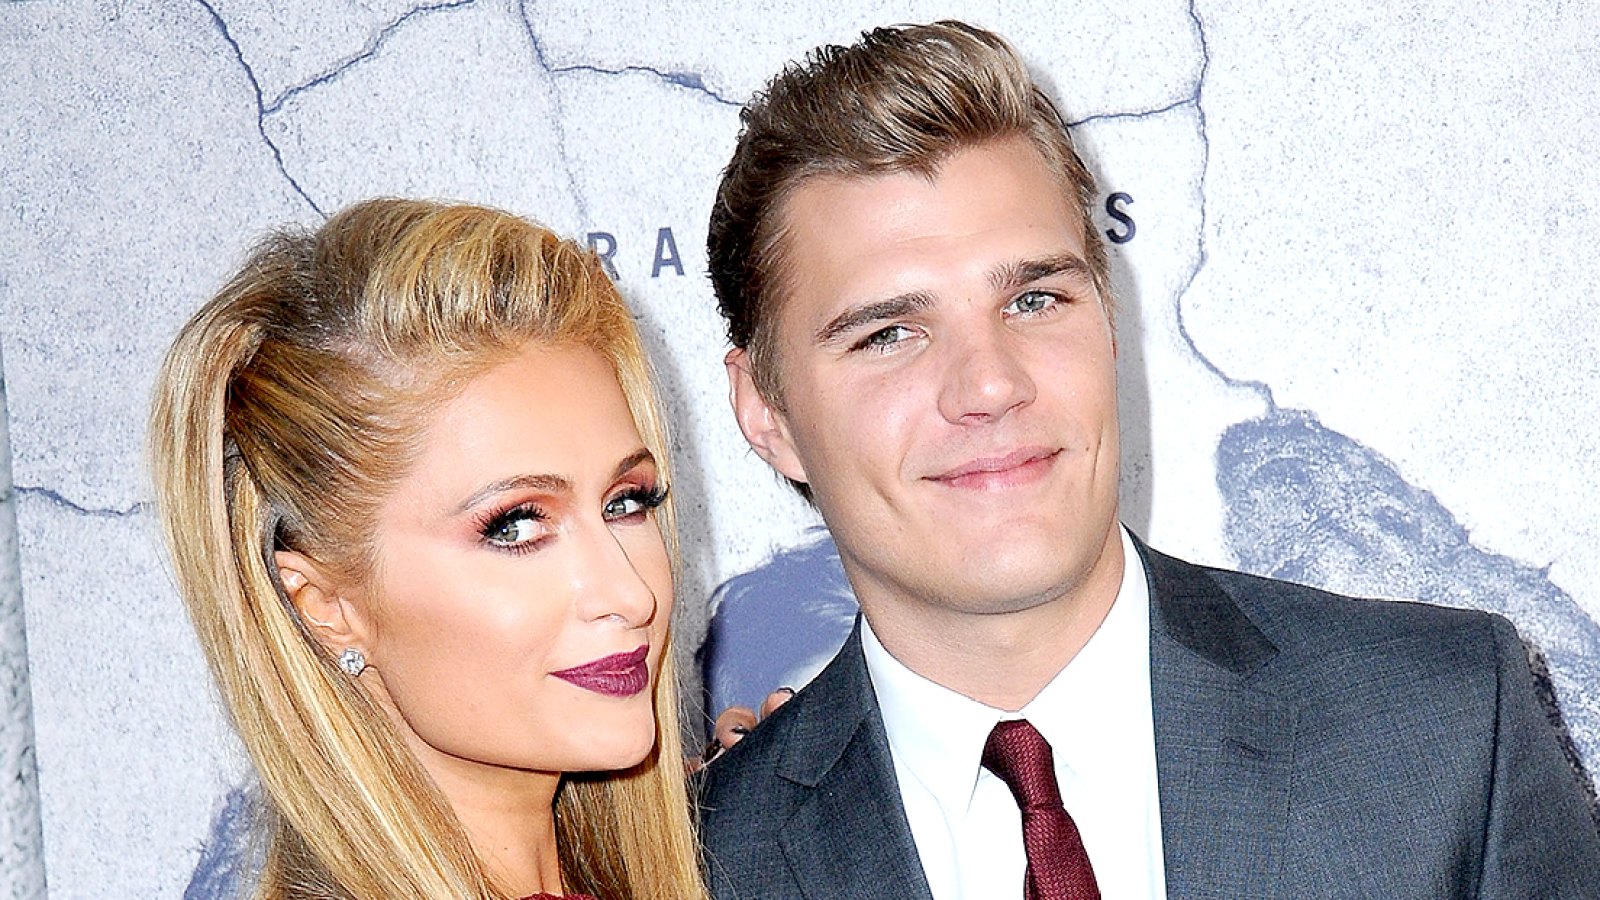 Paris Hilton and Chris Zylka attend the premiere of HBO's 'The Leftovers' Season 3 at Avalon Hollywood on April 4, 2017 in Los Angeles, California.